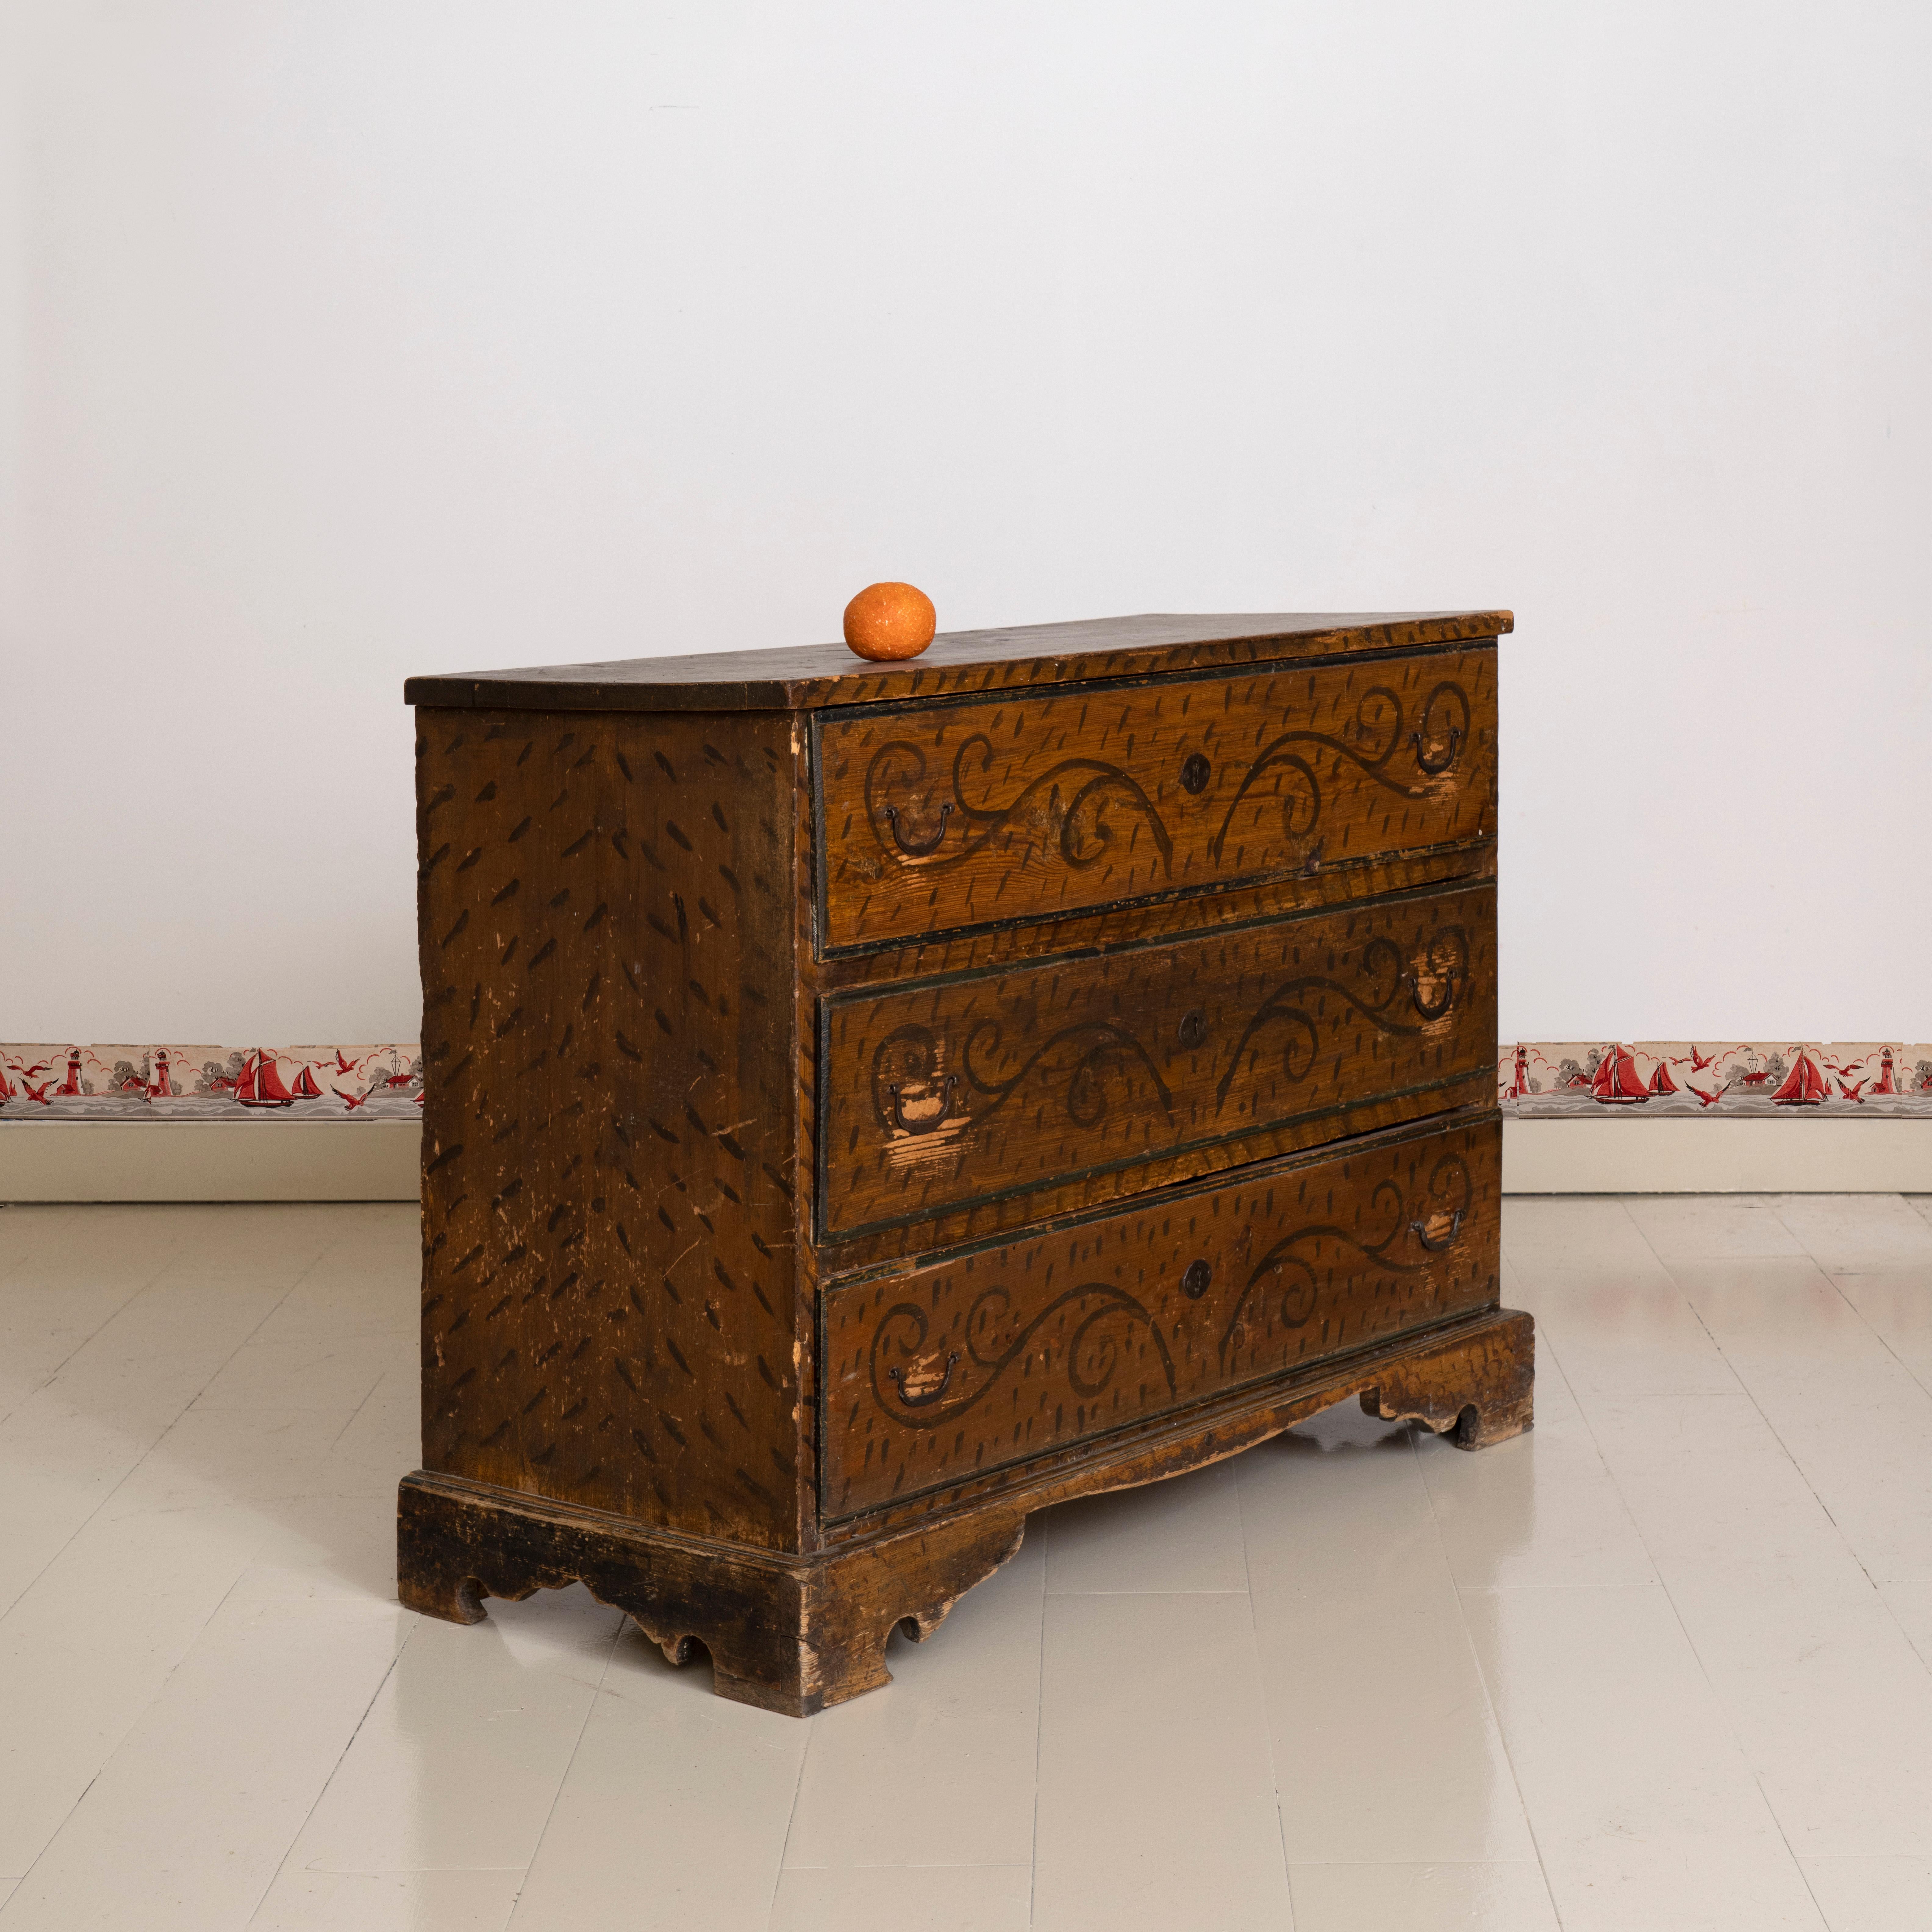 19th century American folk painted chest of drawers. Hand painted on sides and front with dark brown swirling patterns and dashes. A rustic and authentic example of American folk design.